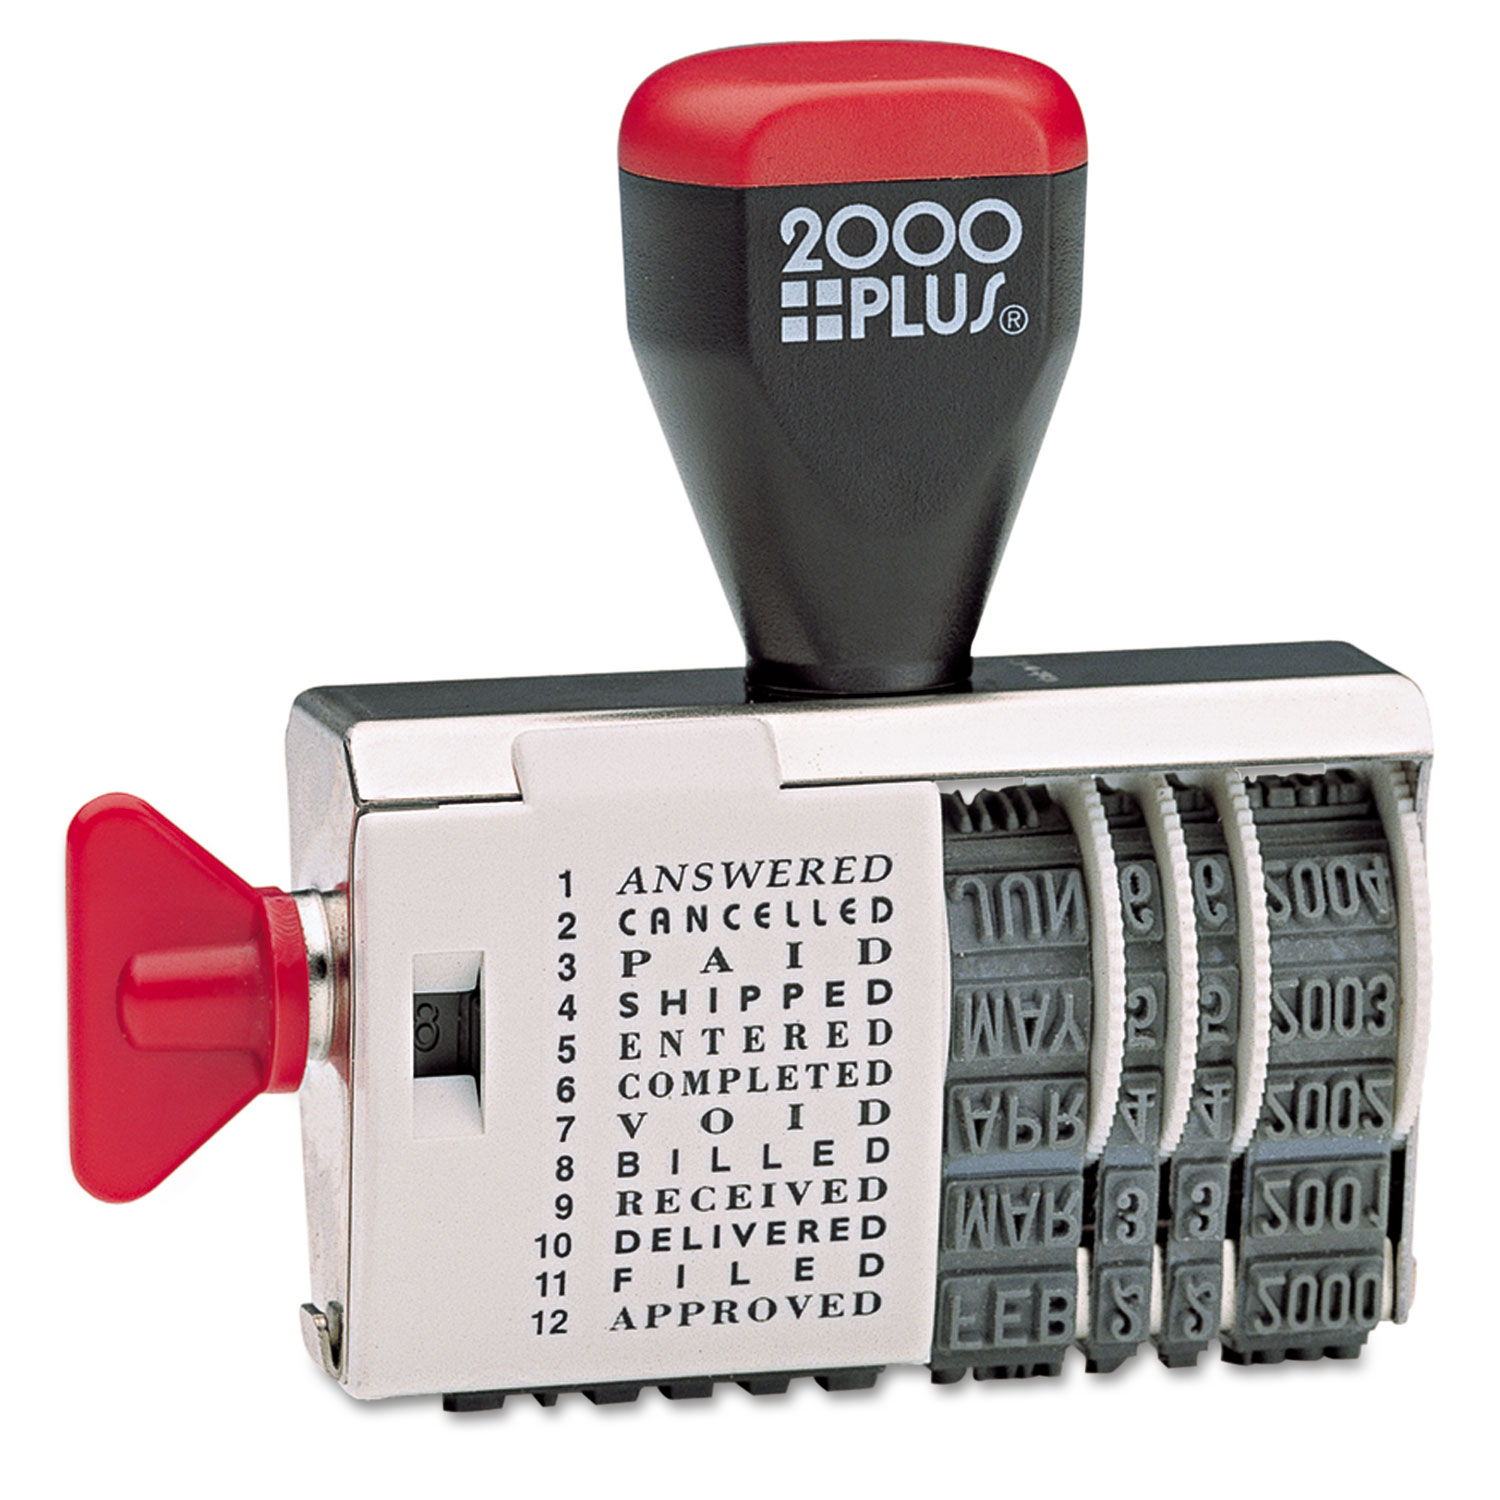  COSCO 2000PLUS 010180 Dial-N-Stamp, 12 Phrases, 1 1/2 x 1/8 (COS010180) 